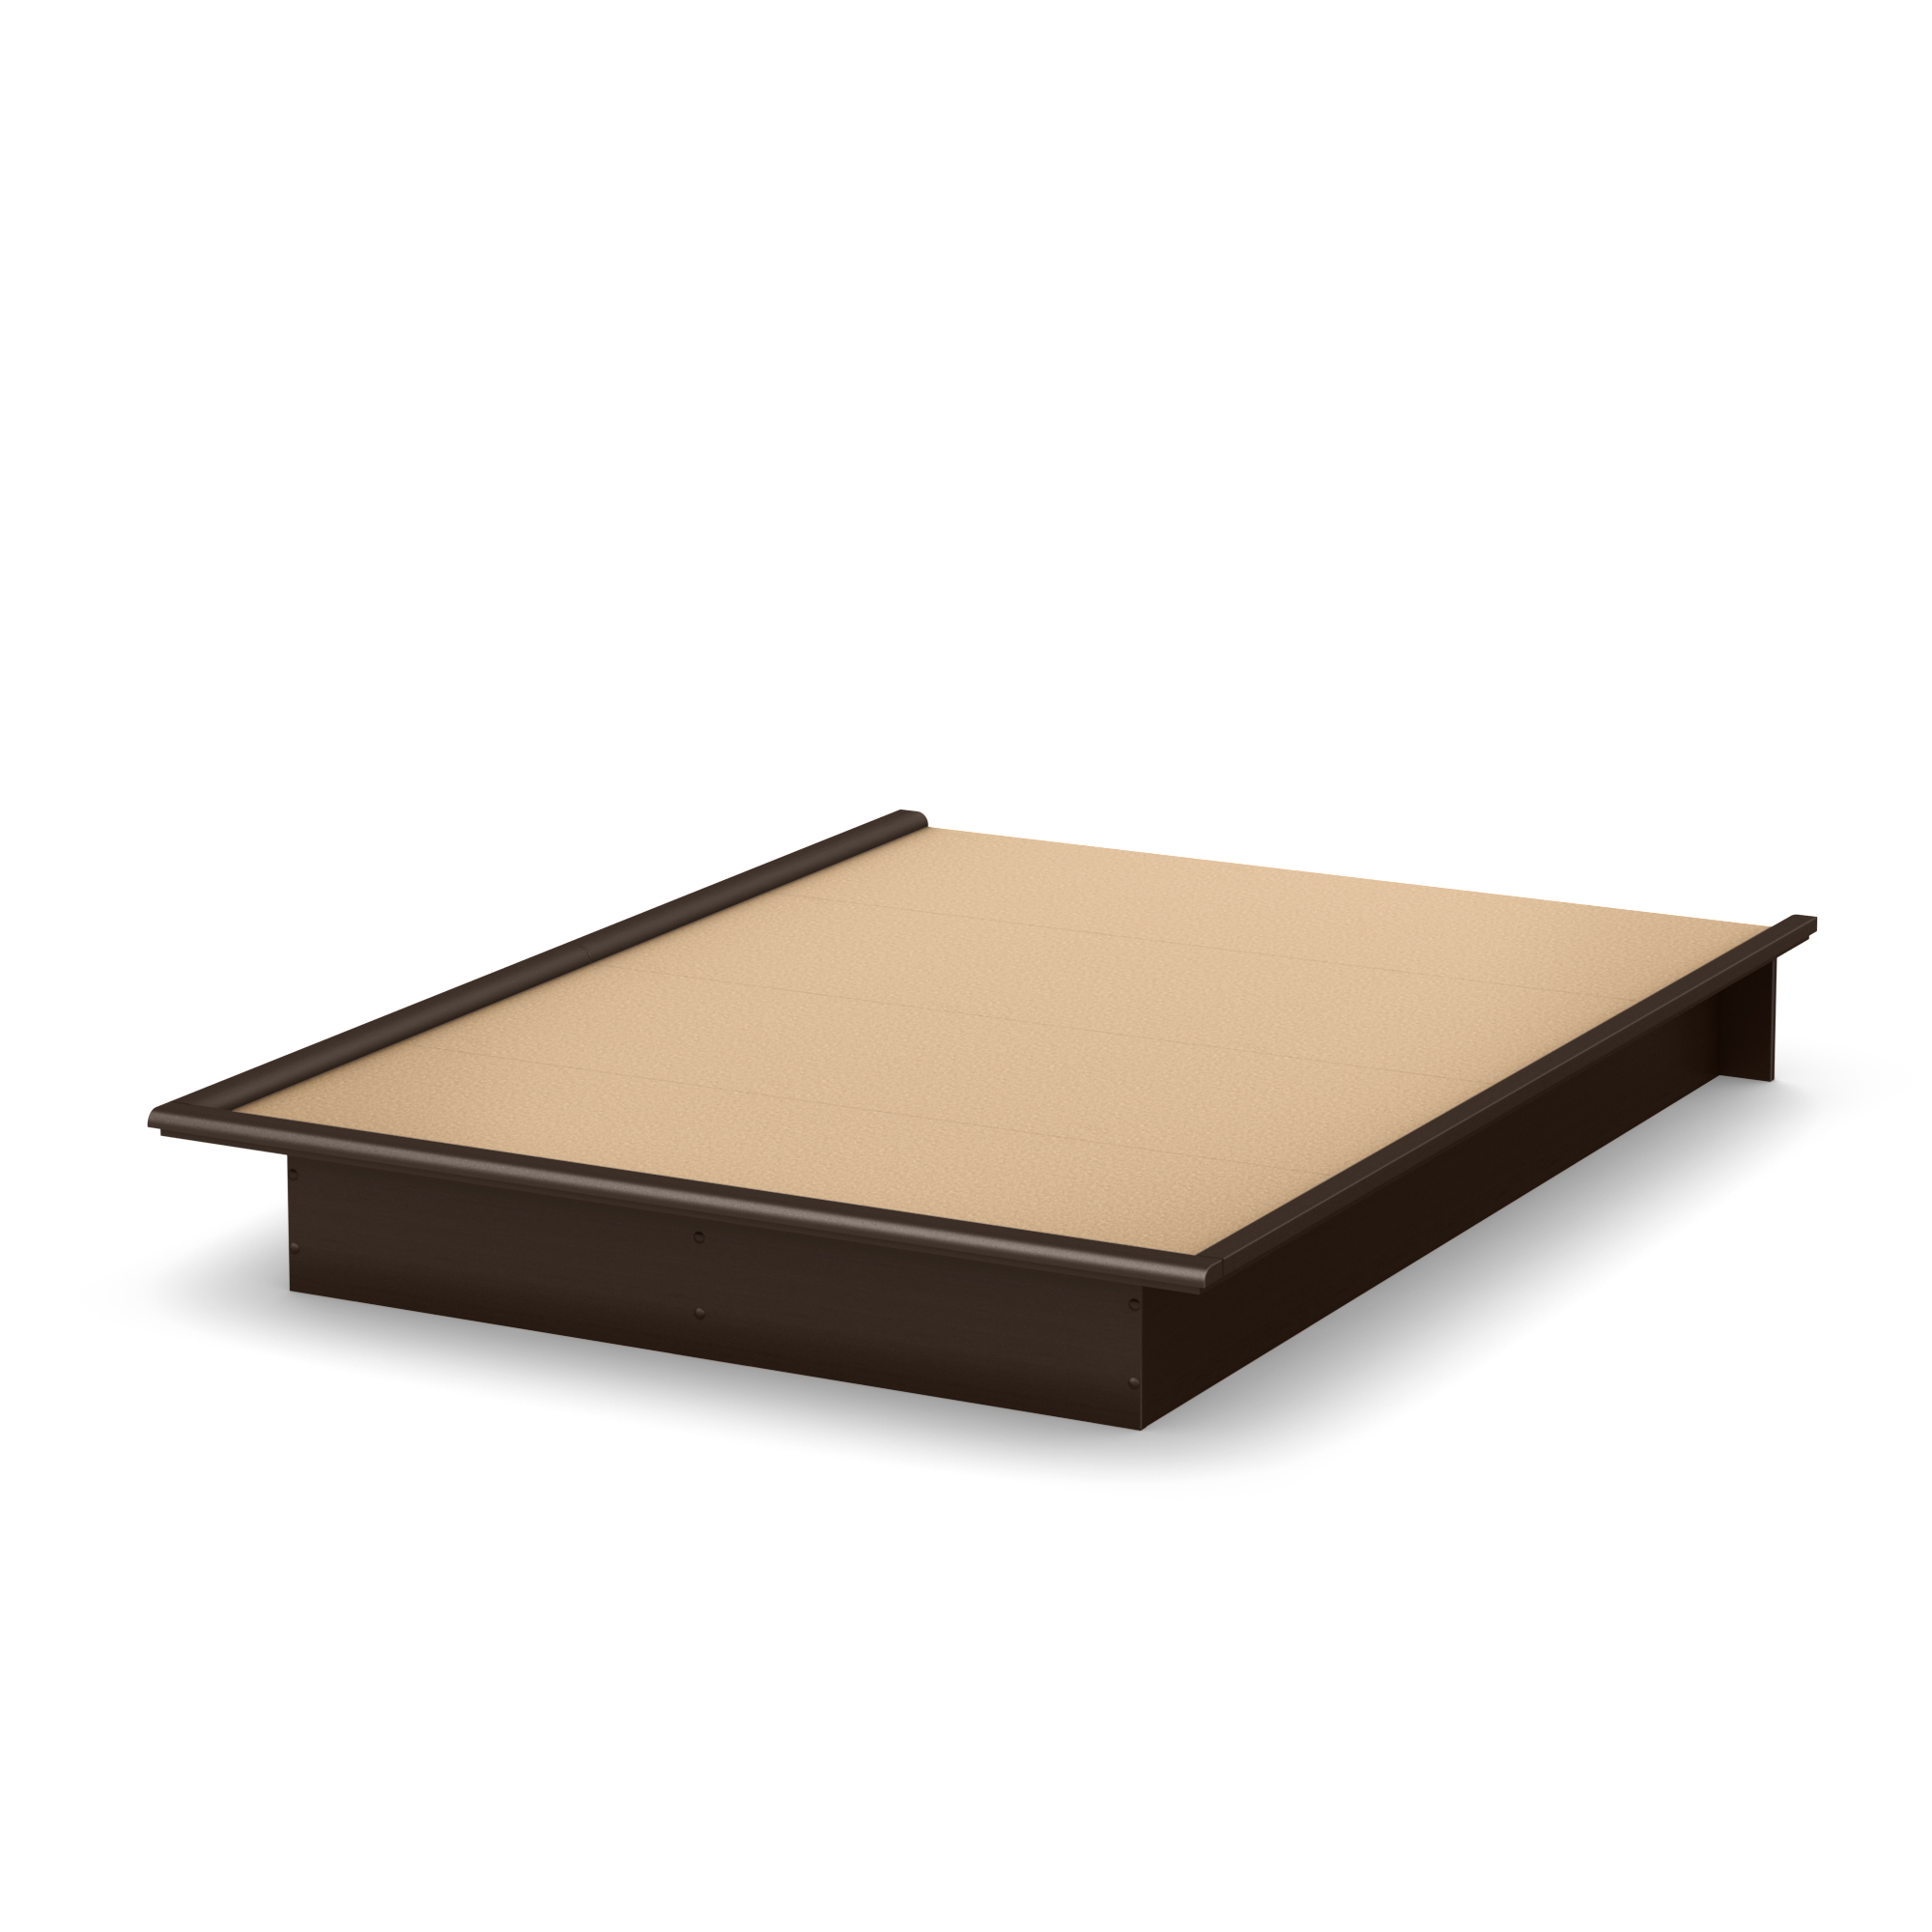 South Shore Basics Queen Platform Bed with Molding, 60'', Multiple Finishes - image 2 of 6